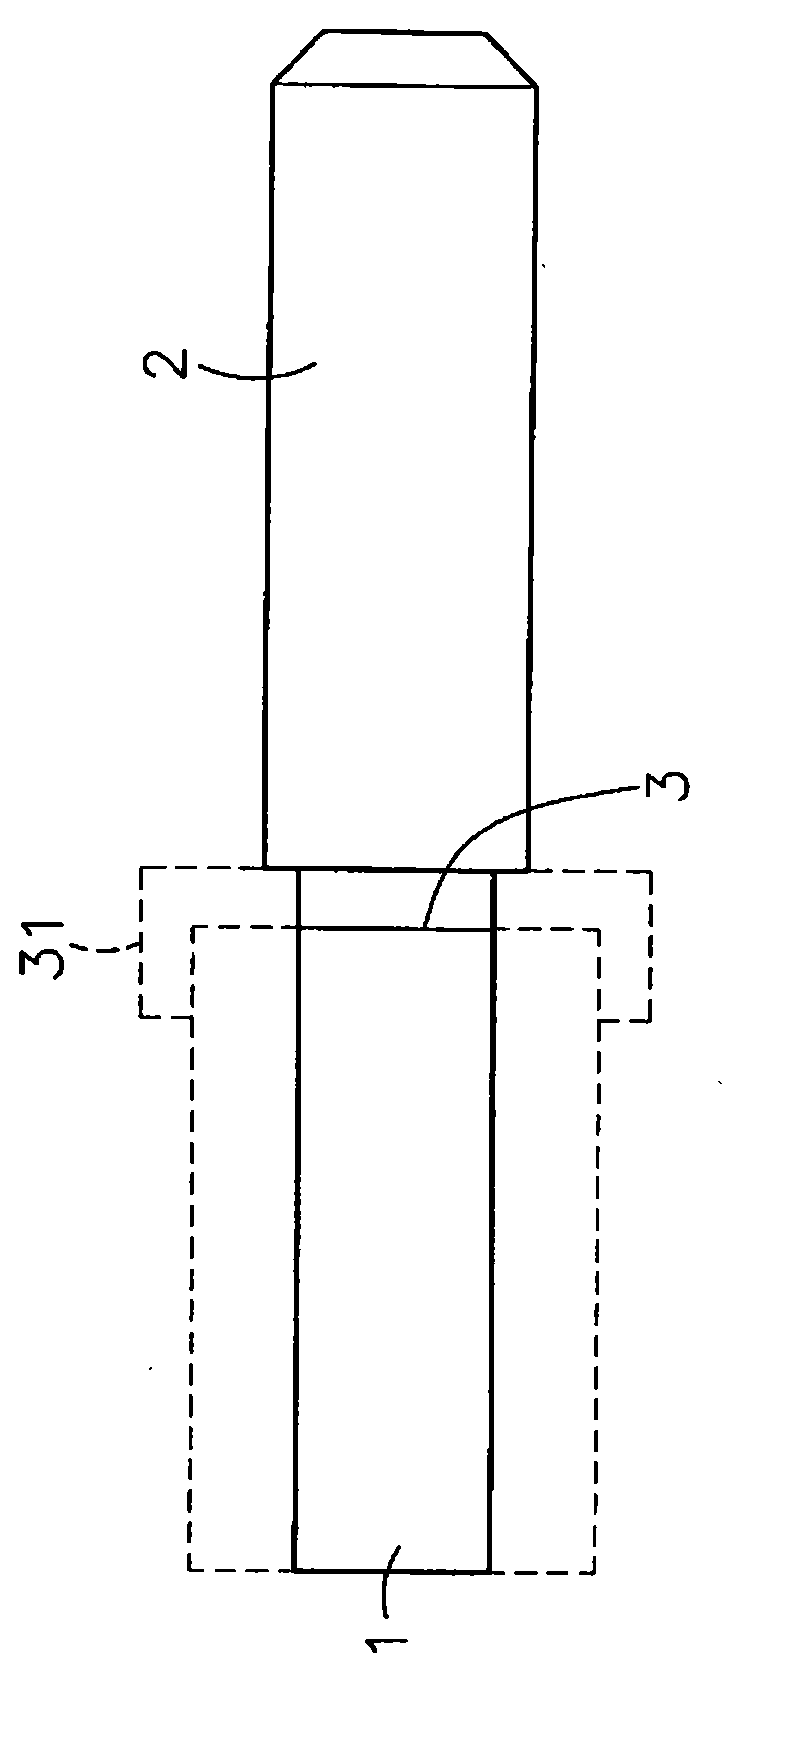 Method for manufacturing milling cutter